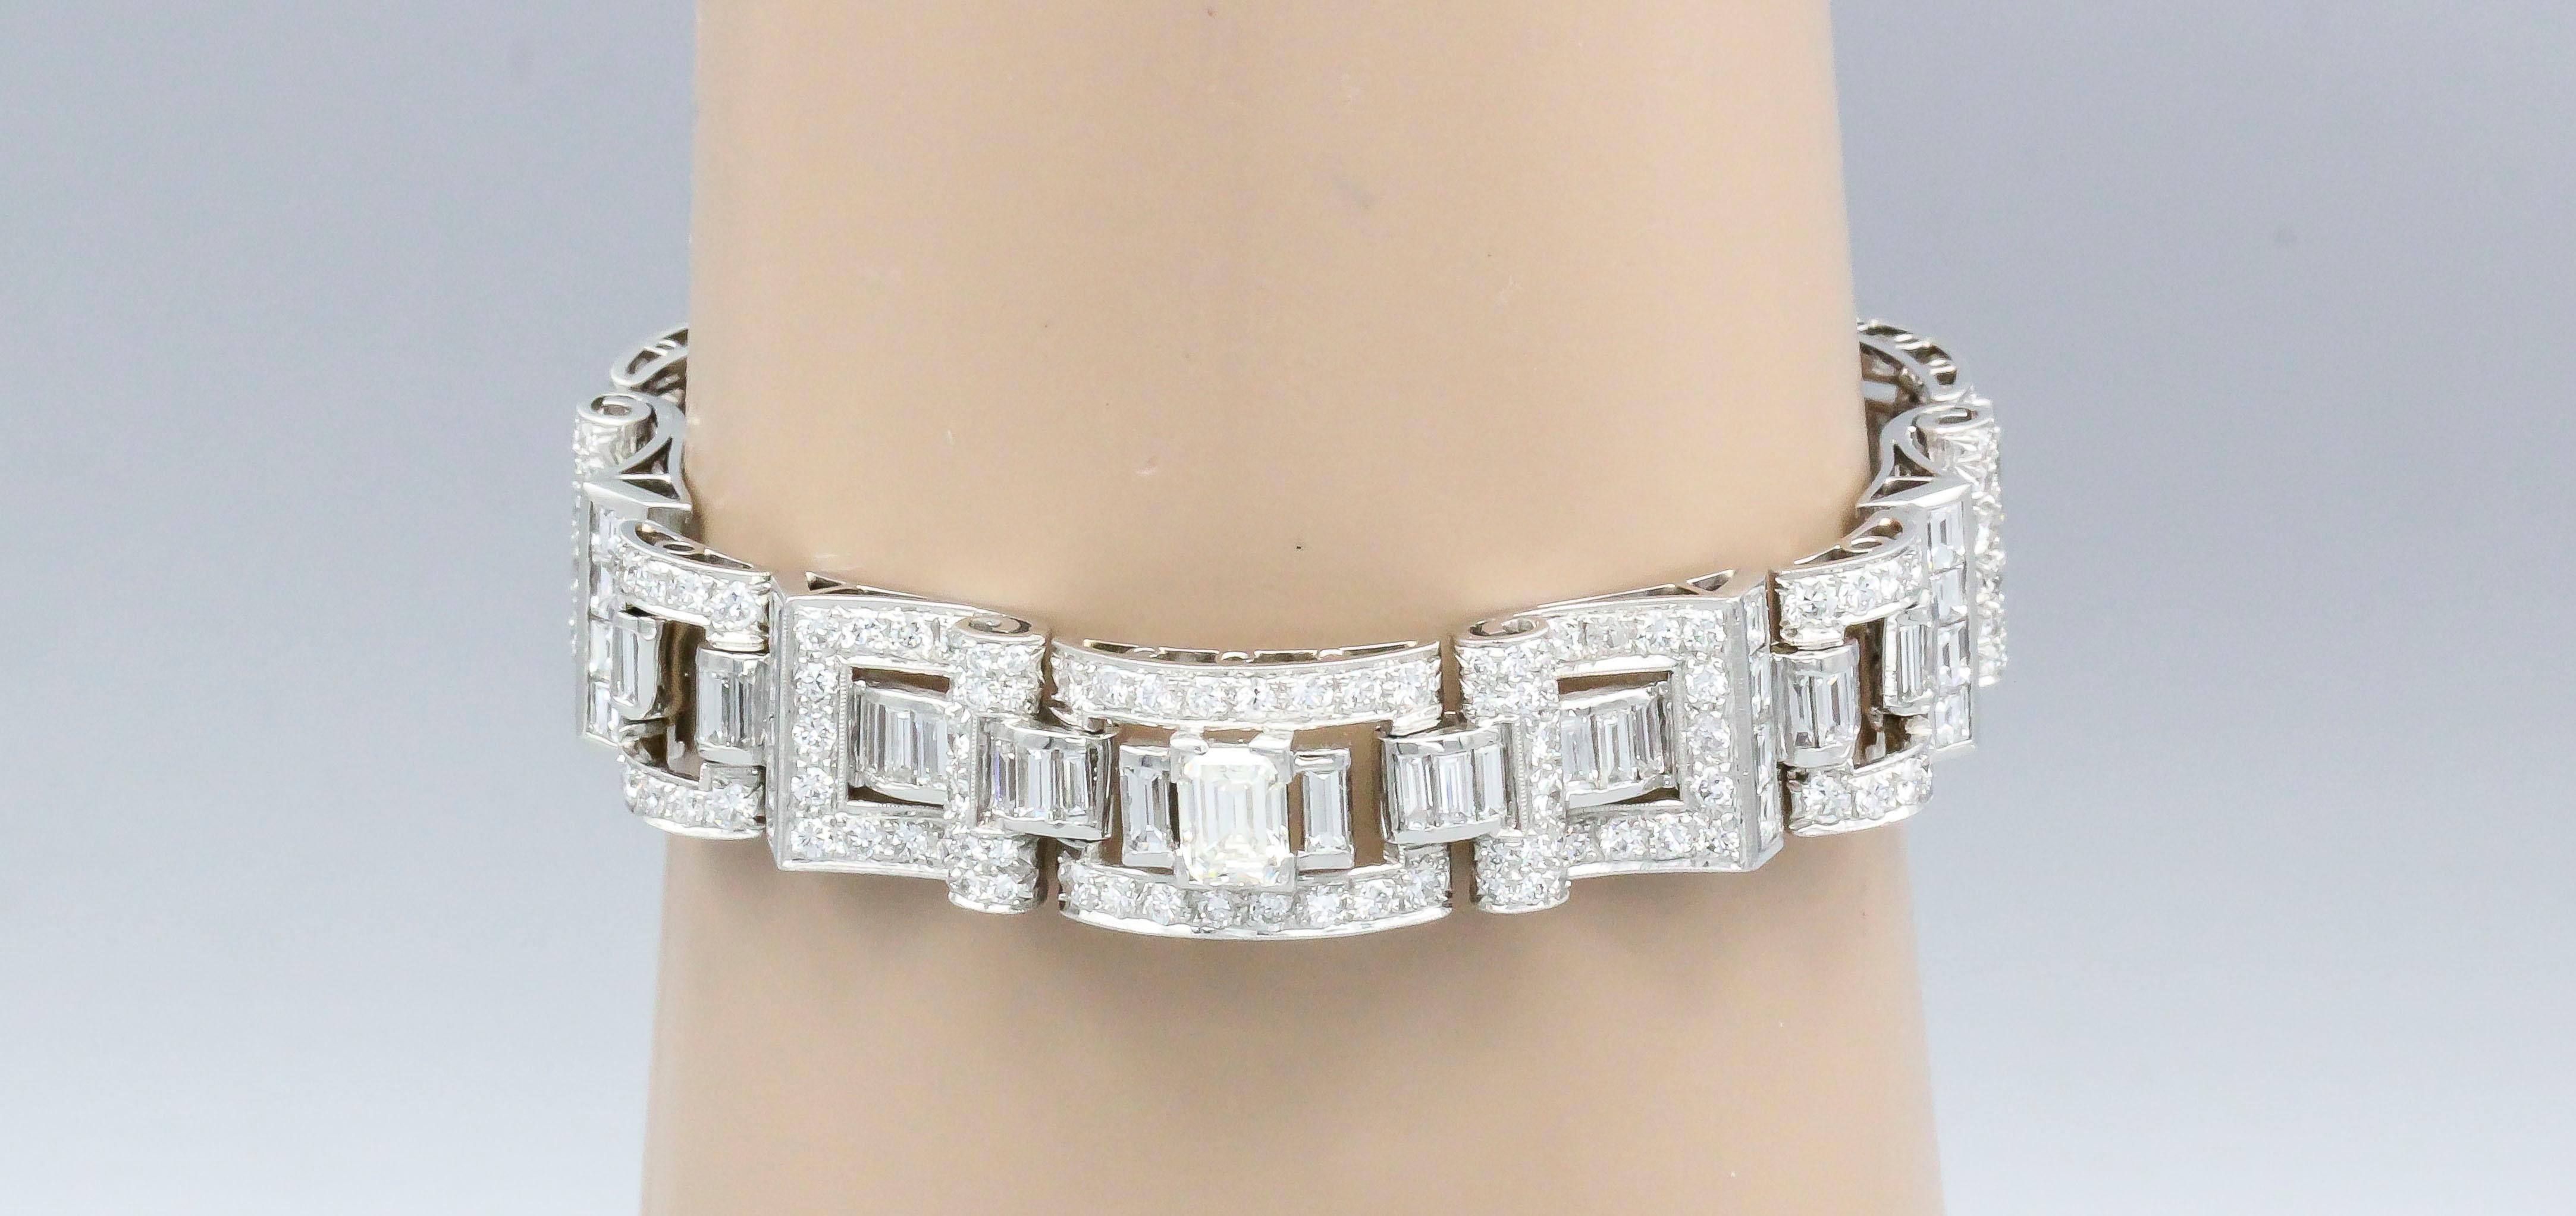 Very fine diamond and platinum bracelet, by Oscar Heyman, circa 1930s. It features high grade emerald cut diamonds, baguette cut diamonds, and round cut diamonds, of approx. 16.0cts total diamond weight. With letter from Oscar Heyman
Hallmarks: .90